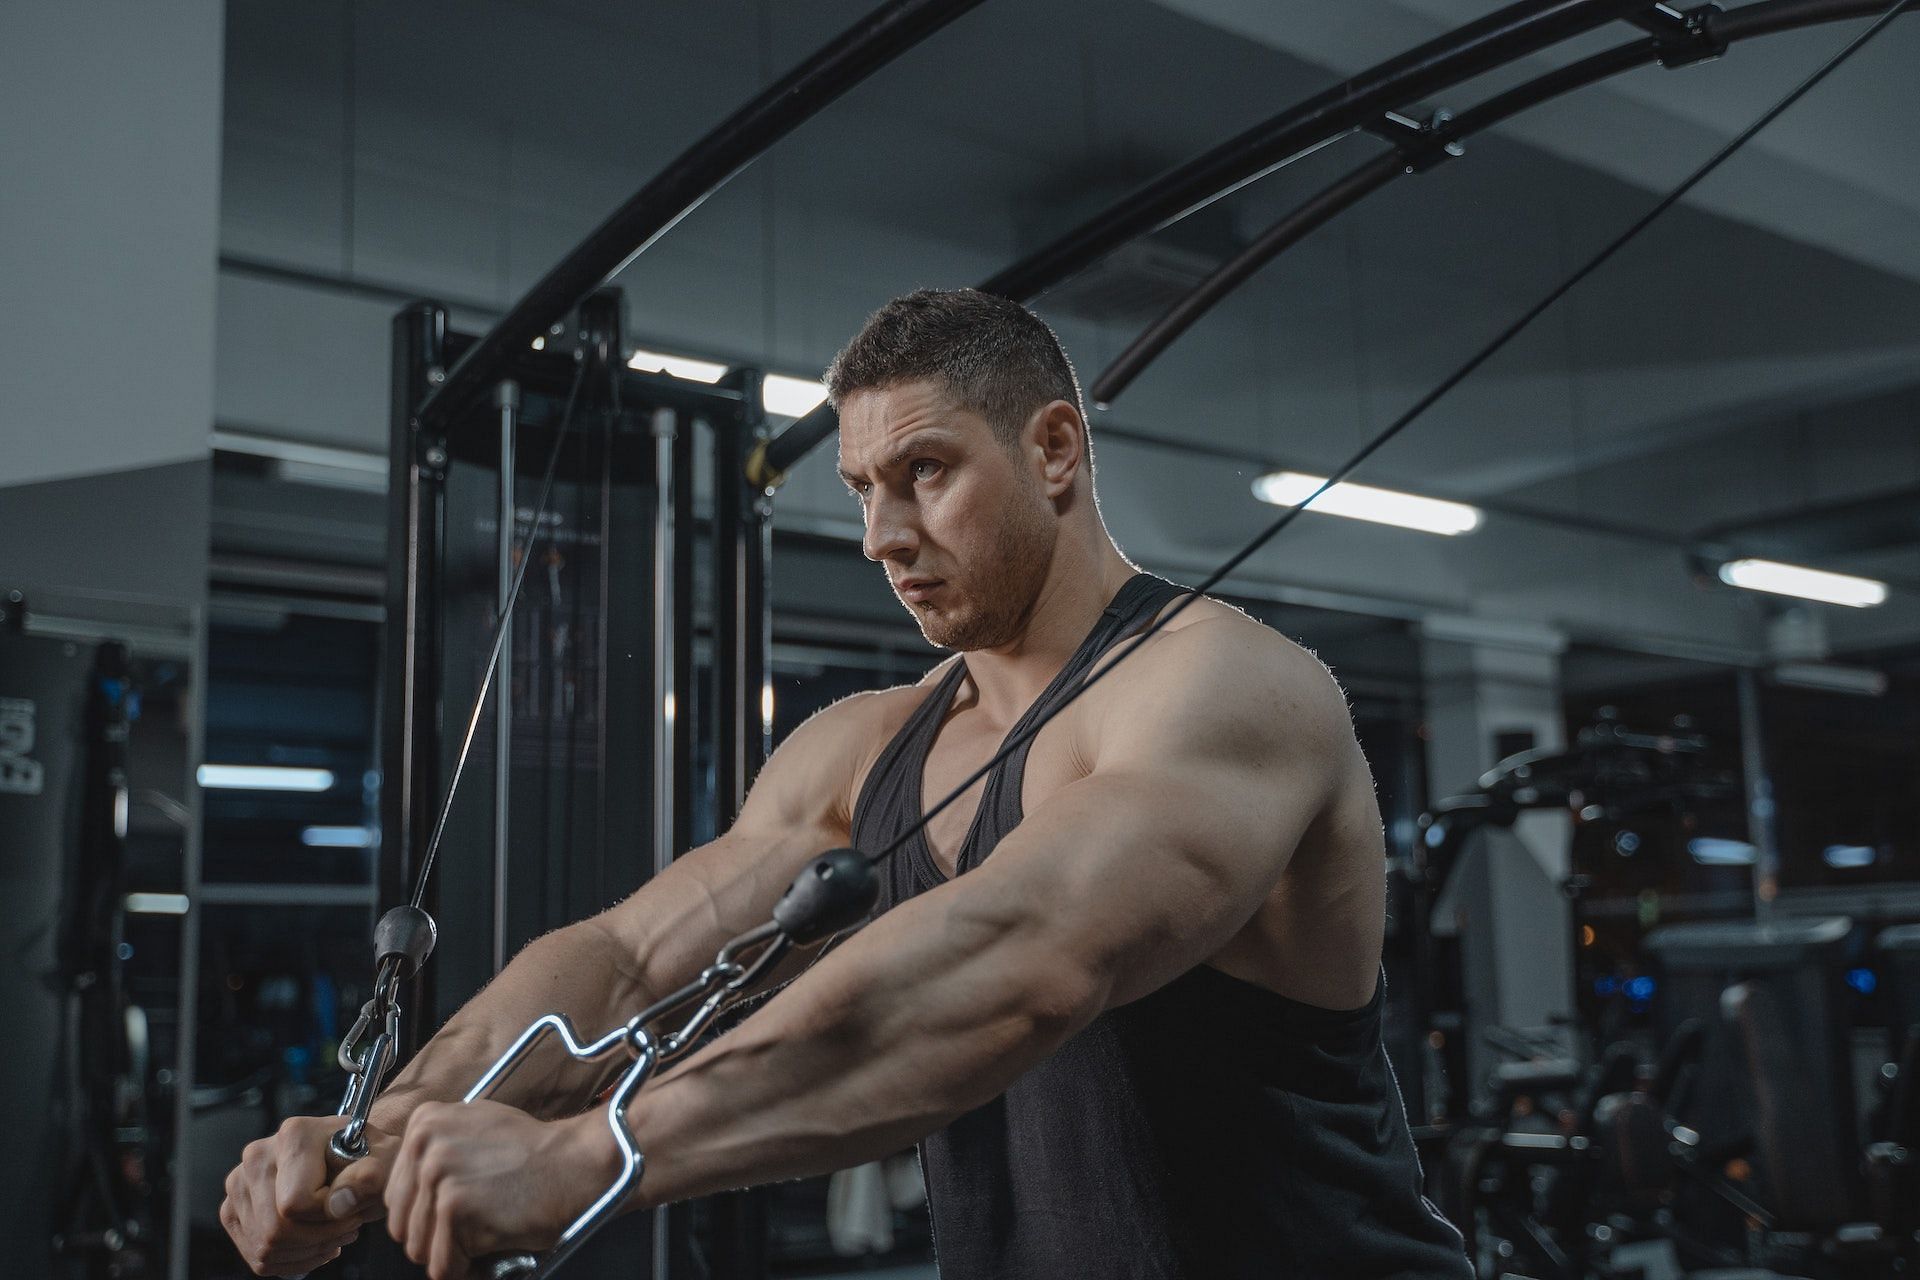 Cable machines are beneficial for upper back exercises. (Photo via Pexels/Tima Miroshnichenko)